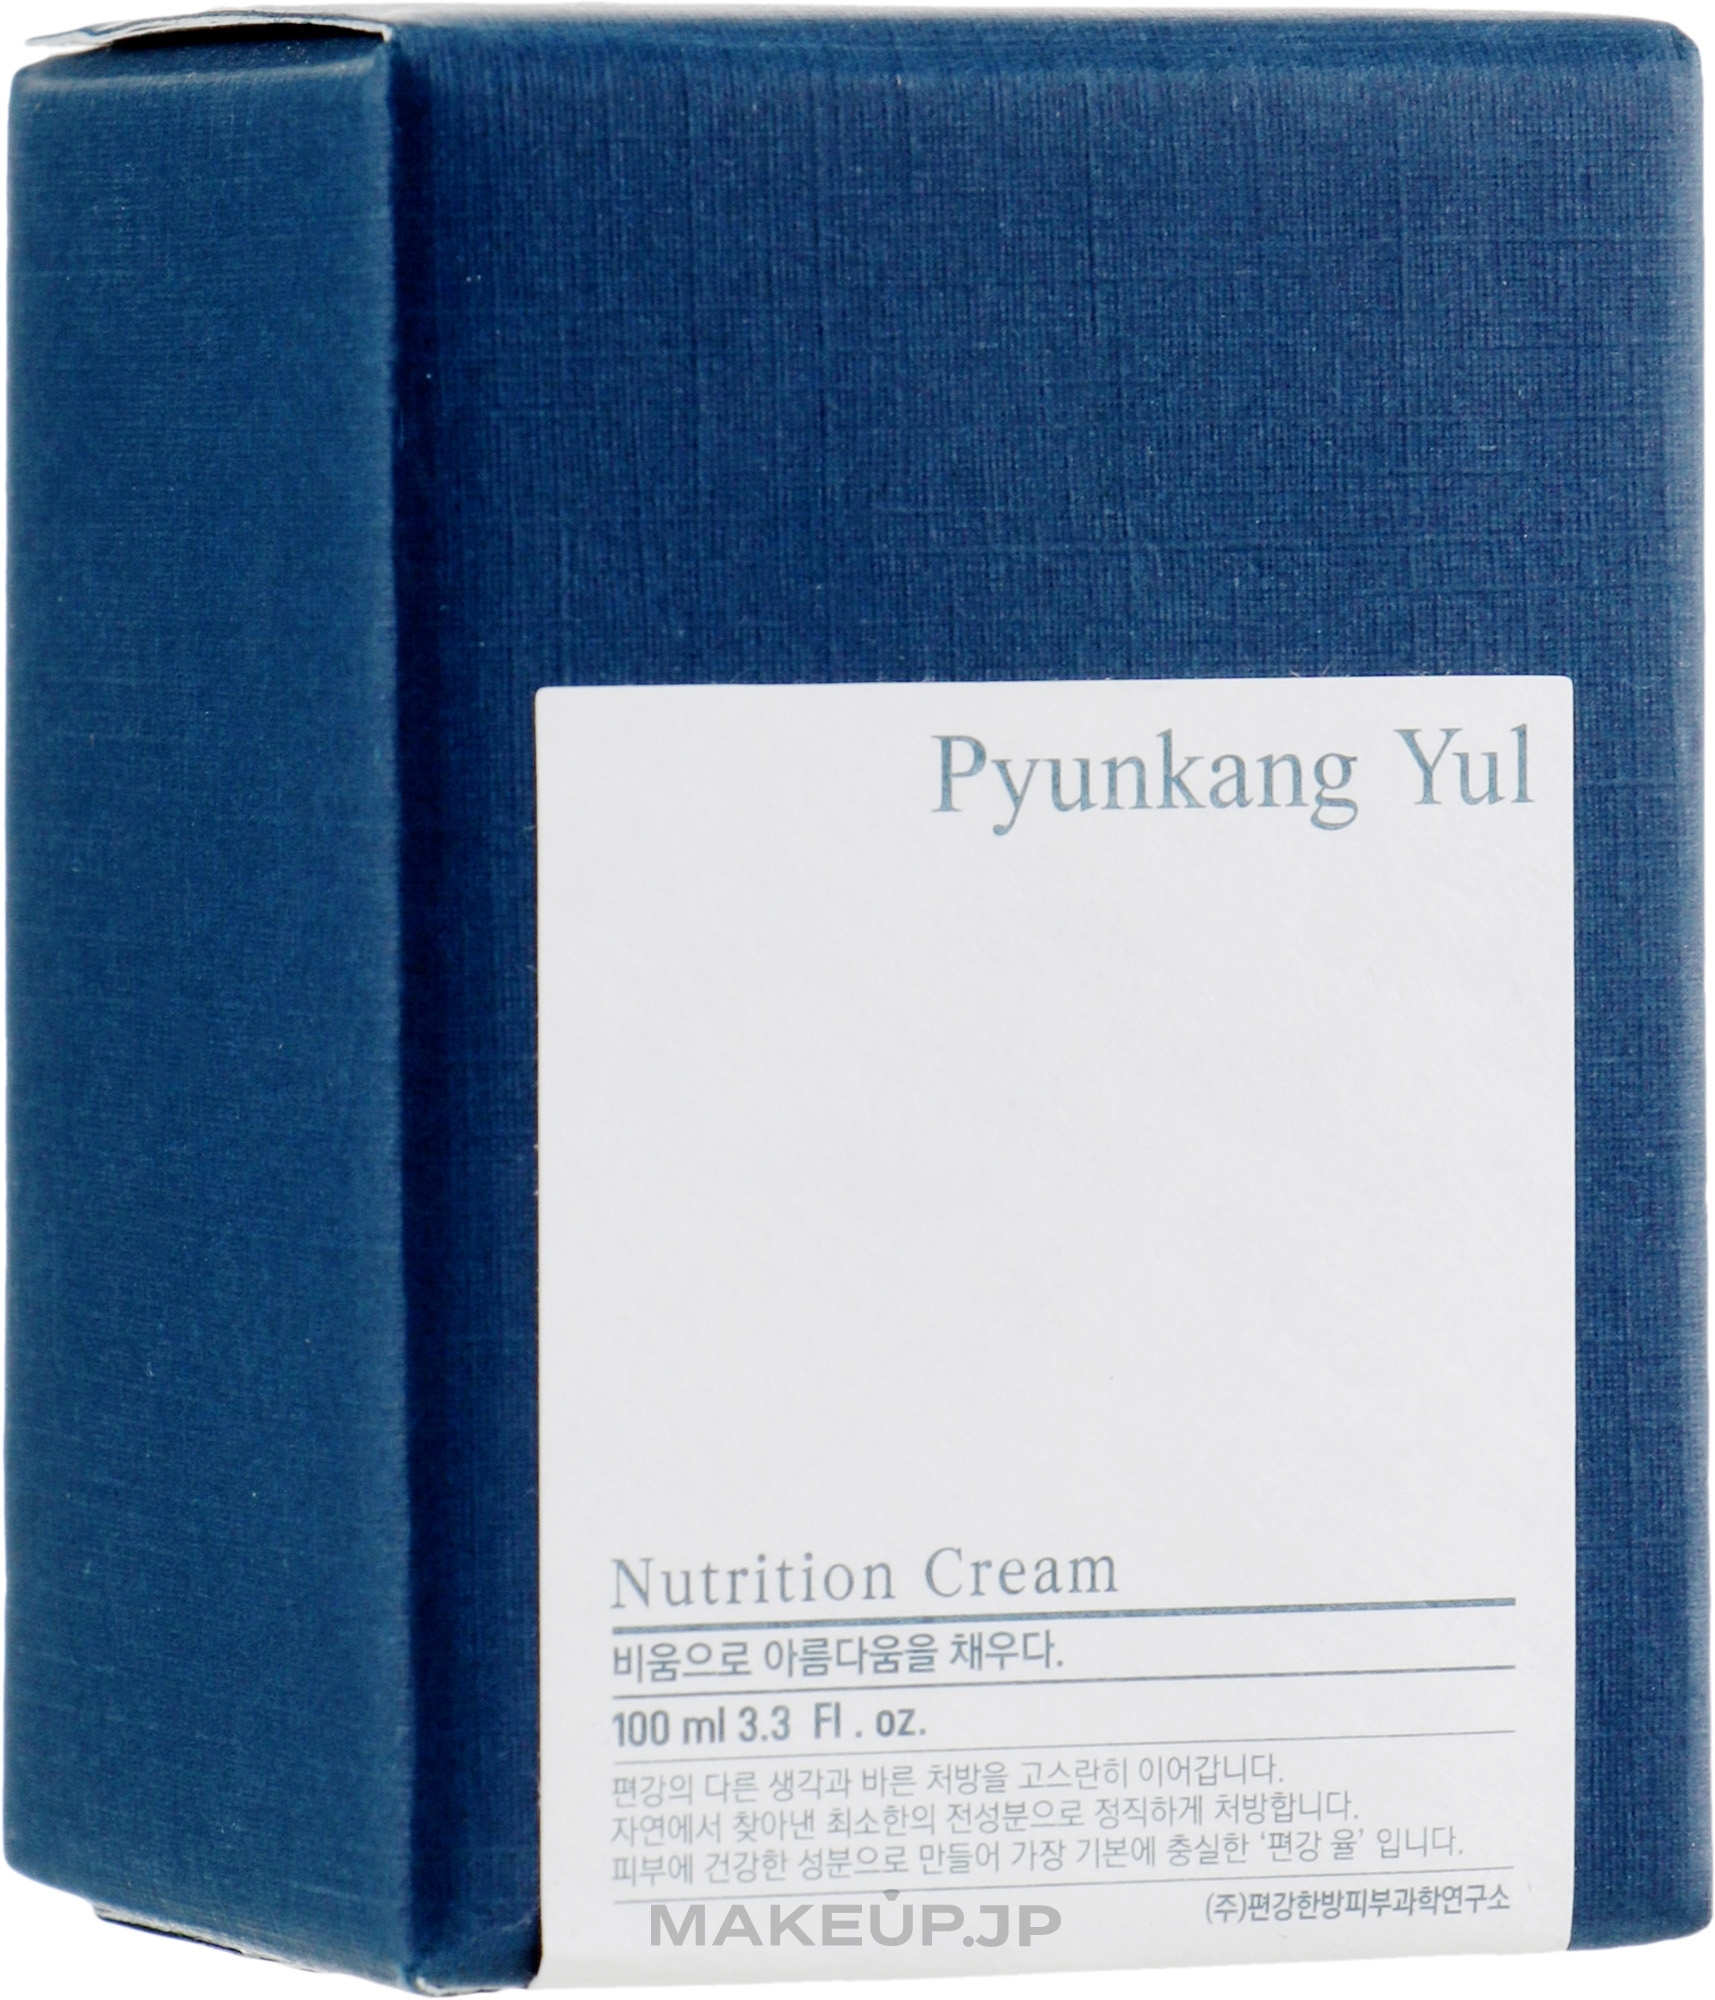 Nourishing Cream with Astragalus Extract and Natural Oils Complex - Pyunkang Yul Nutrition Cream — photo 100 ml